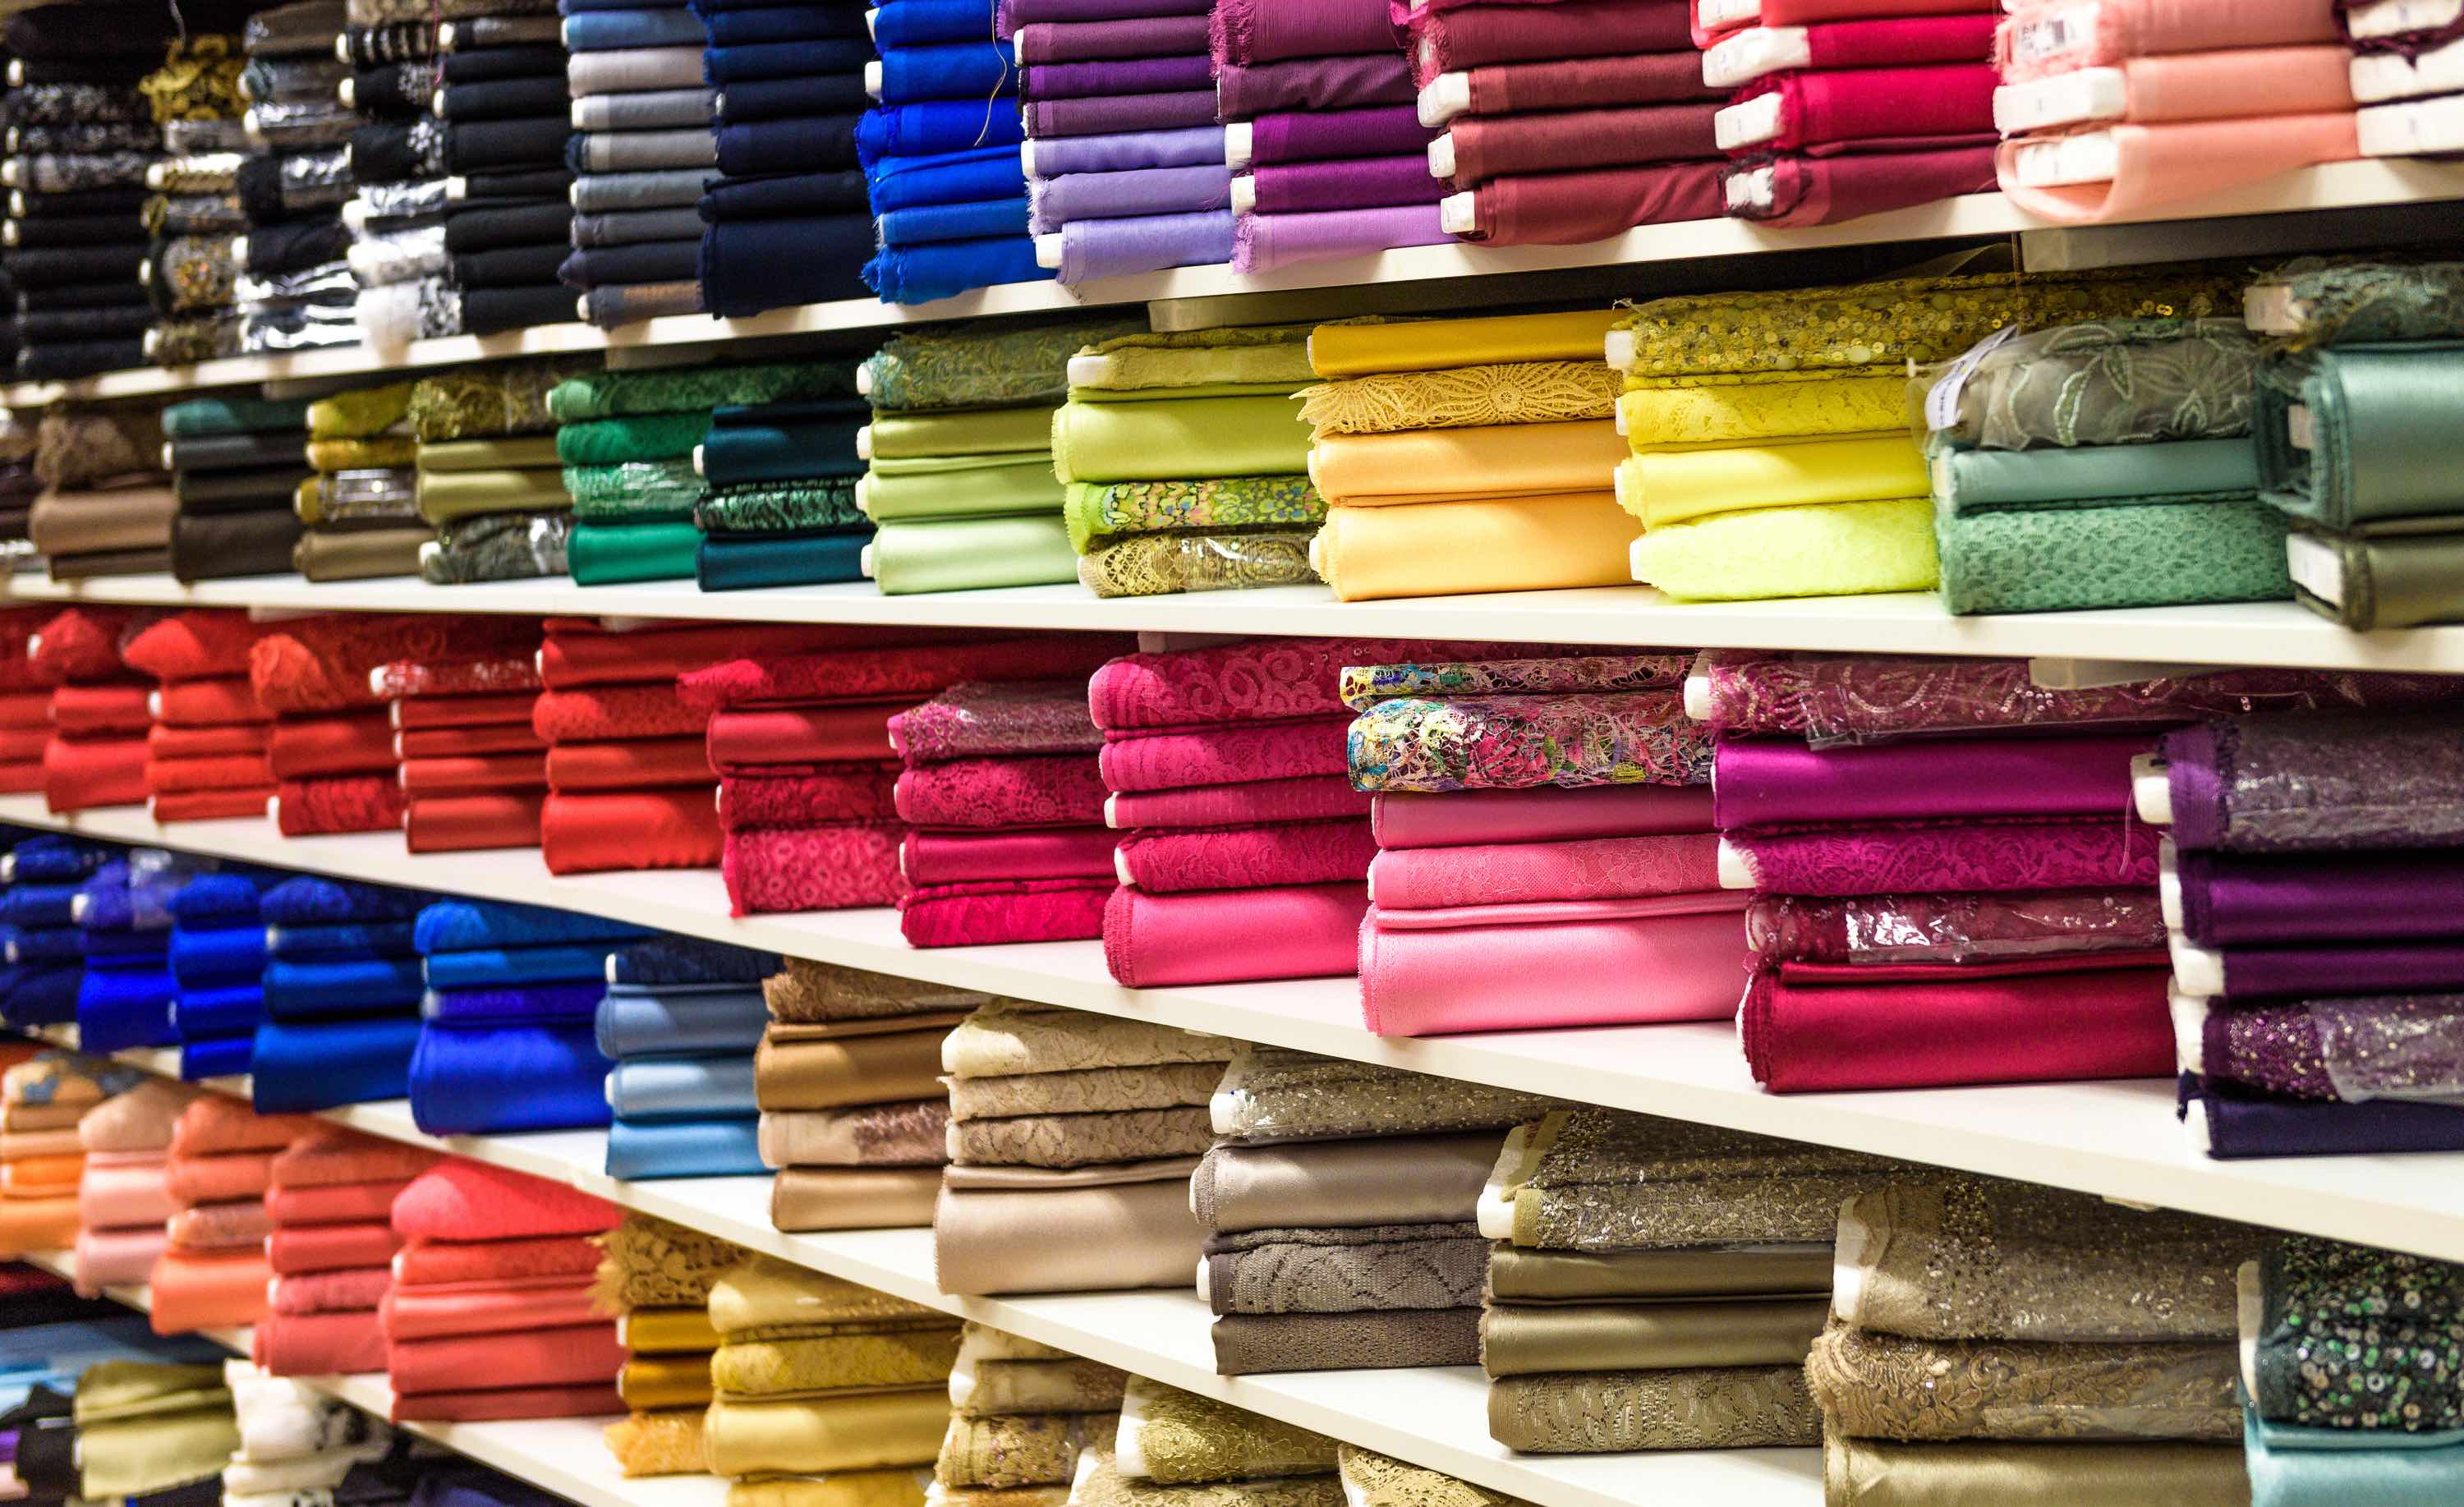 Rolls of fabric and textiles.jpg